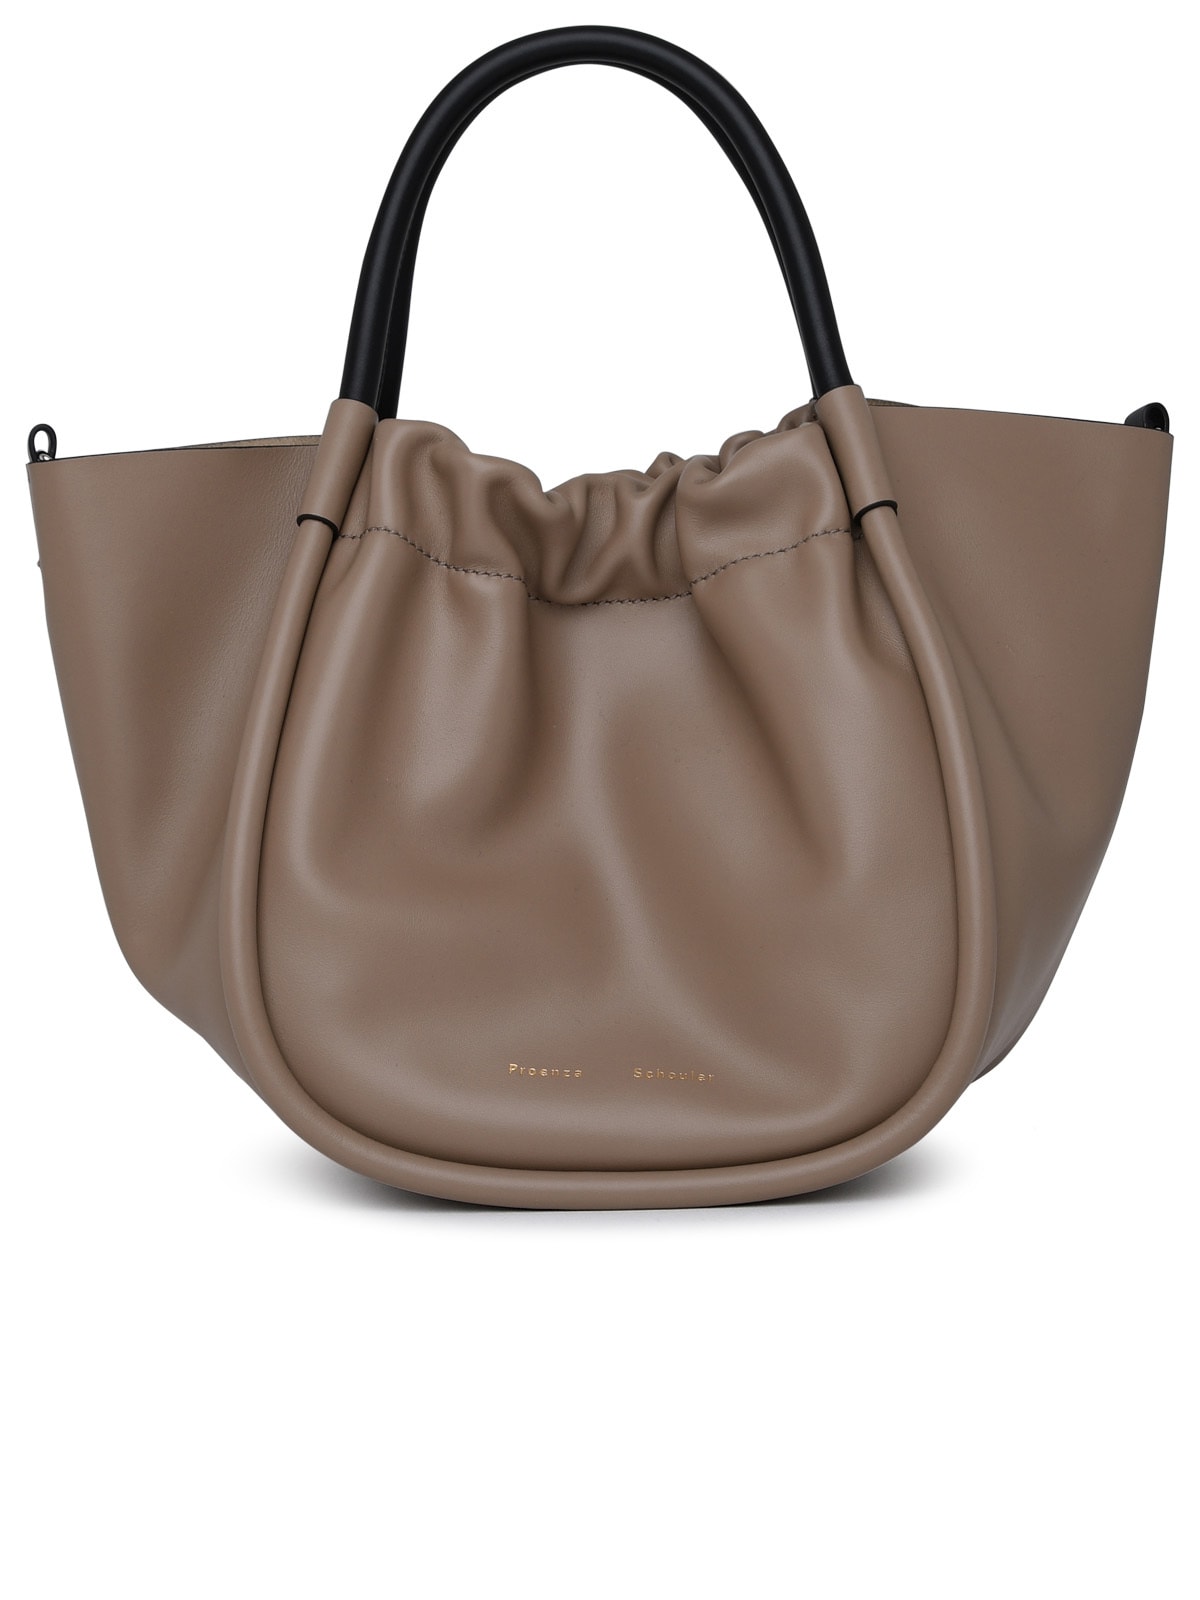 PROENZA SCHOULER RUCHED BAG IN BEIGE LEATHER